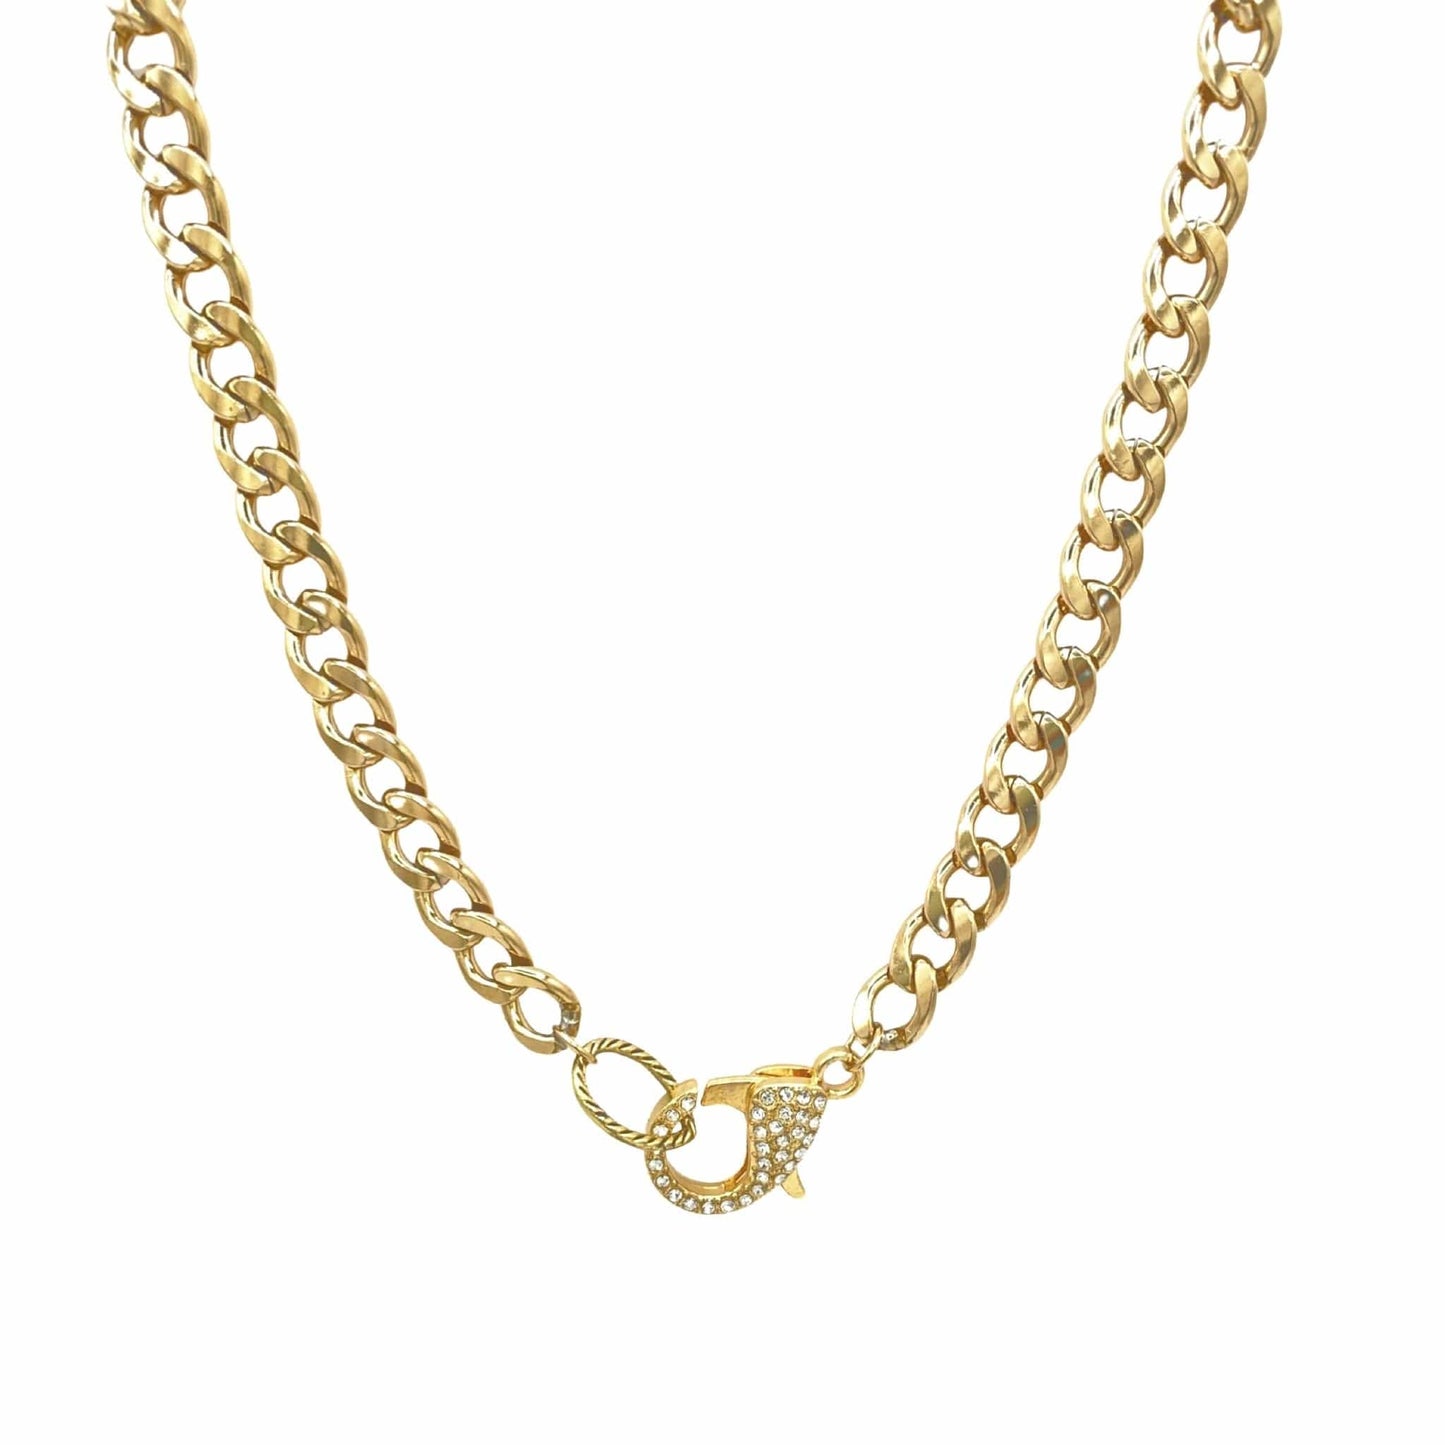 Gold Stainless Steel Curb Chain Necklace with Pave’ Lobster Clasp